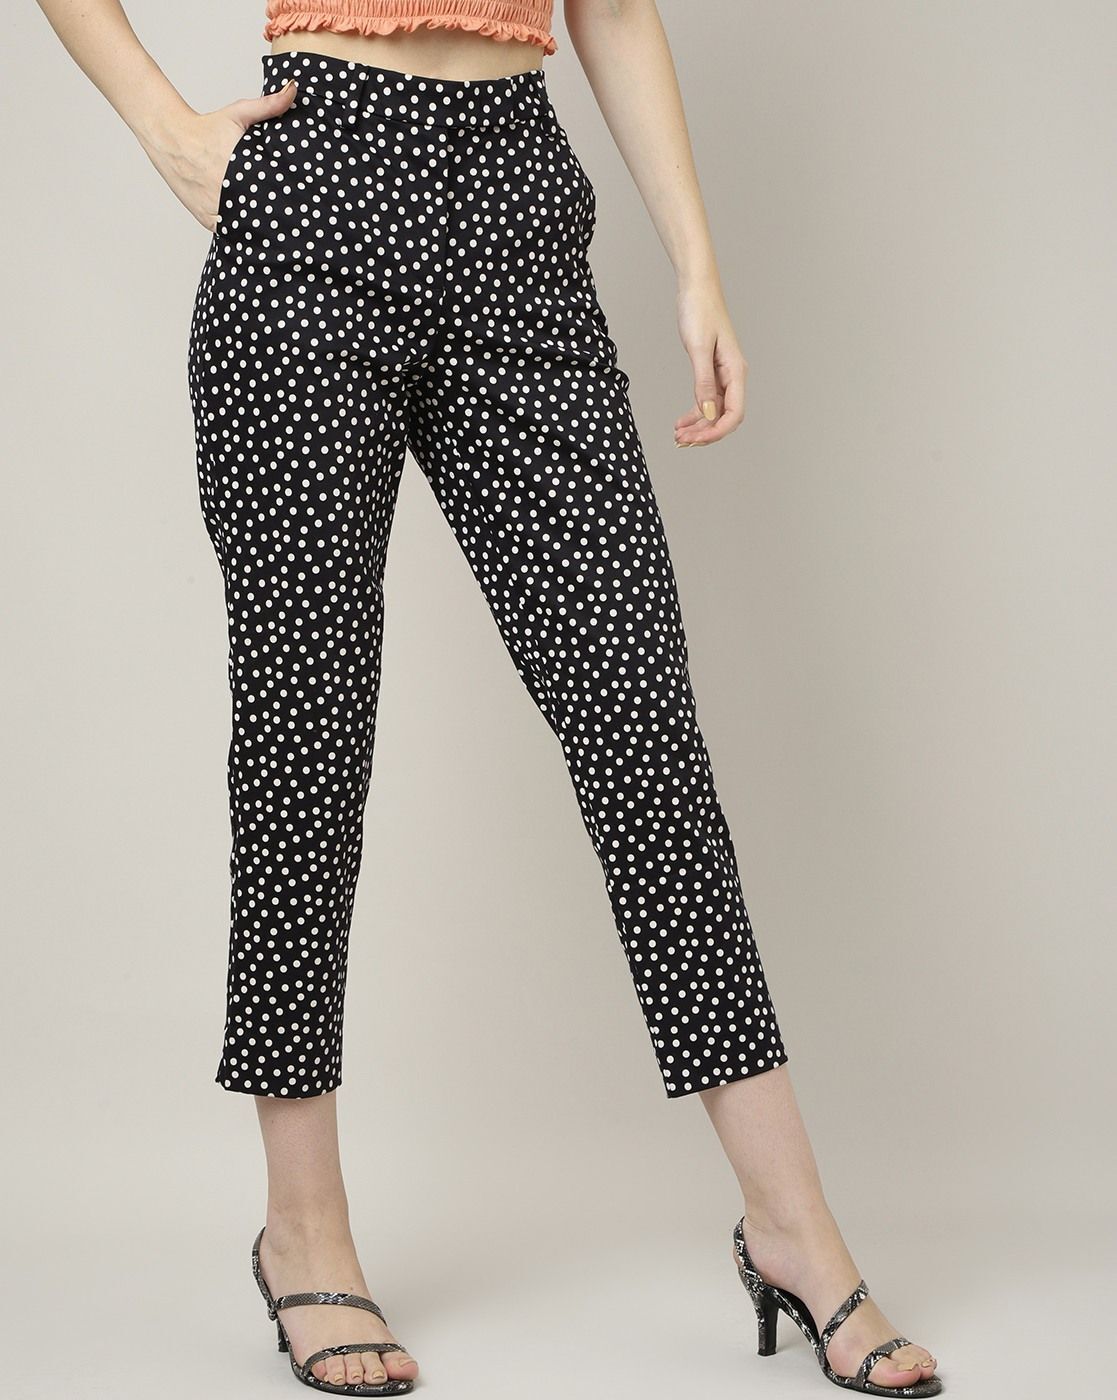 Shop Marks  Spencer Womens Wool Trousers up to 75 Off  DealDoodle